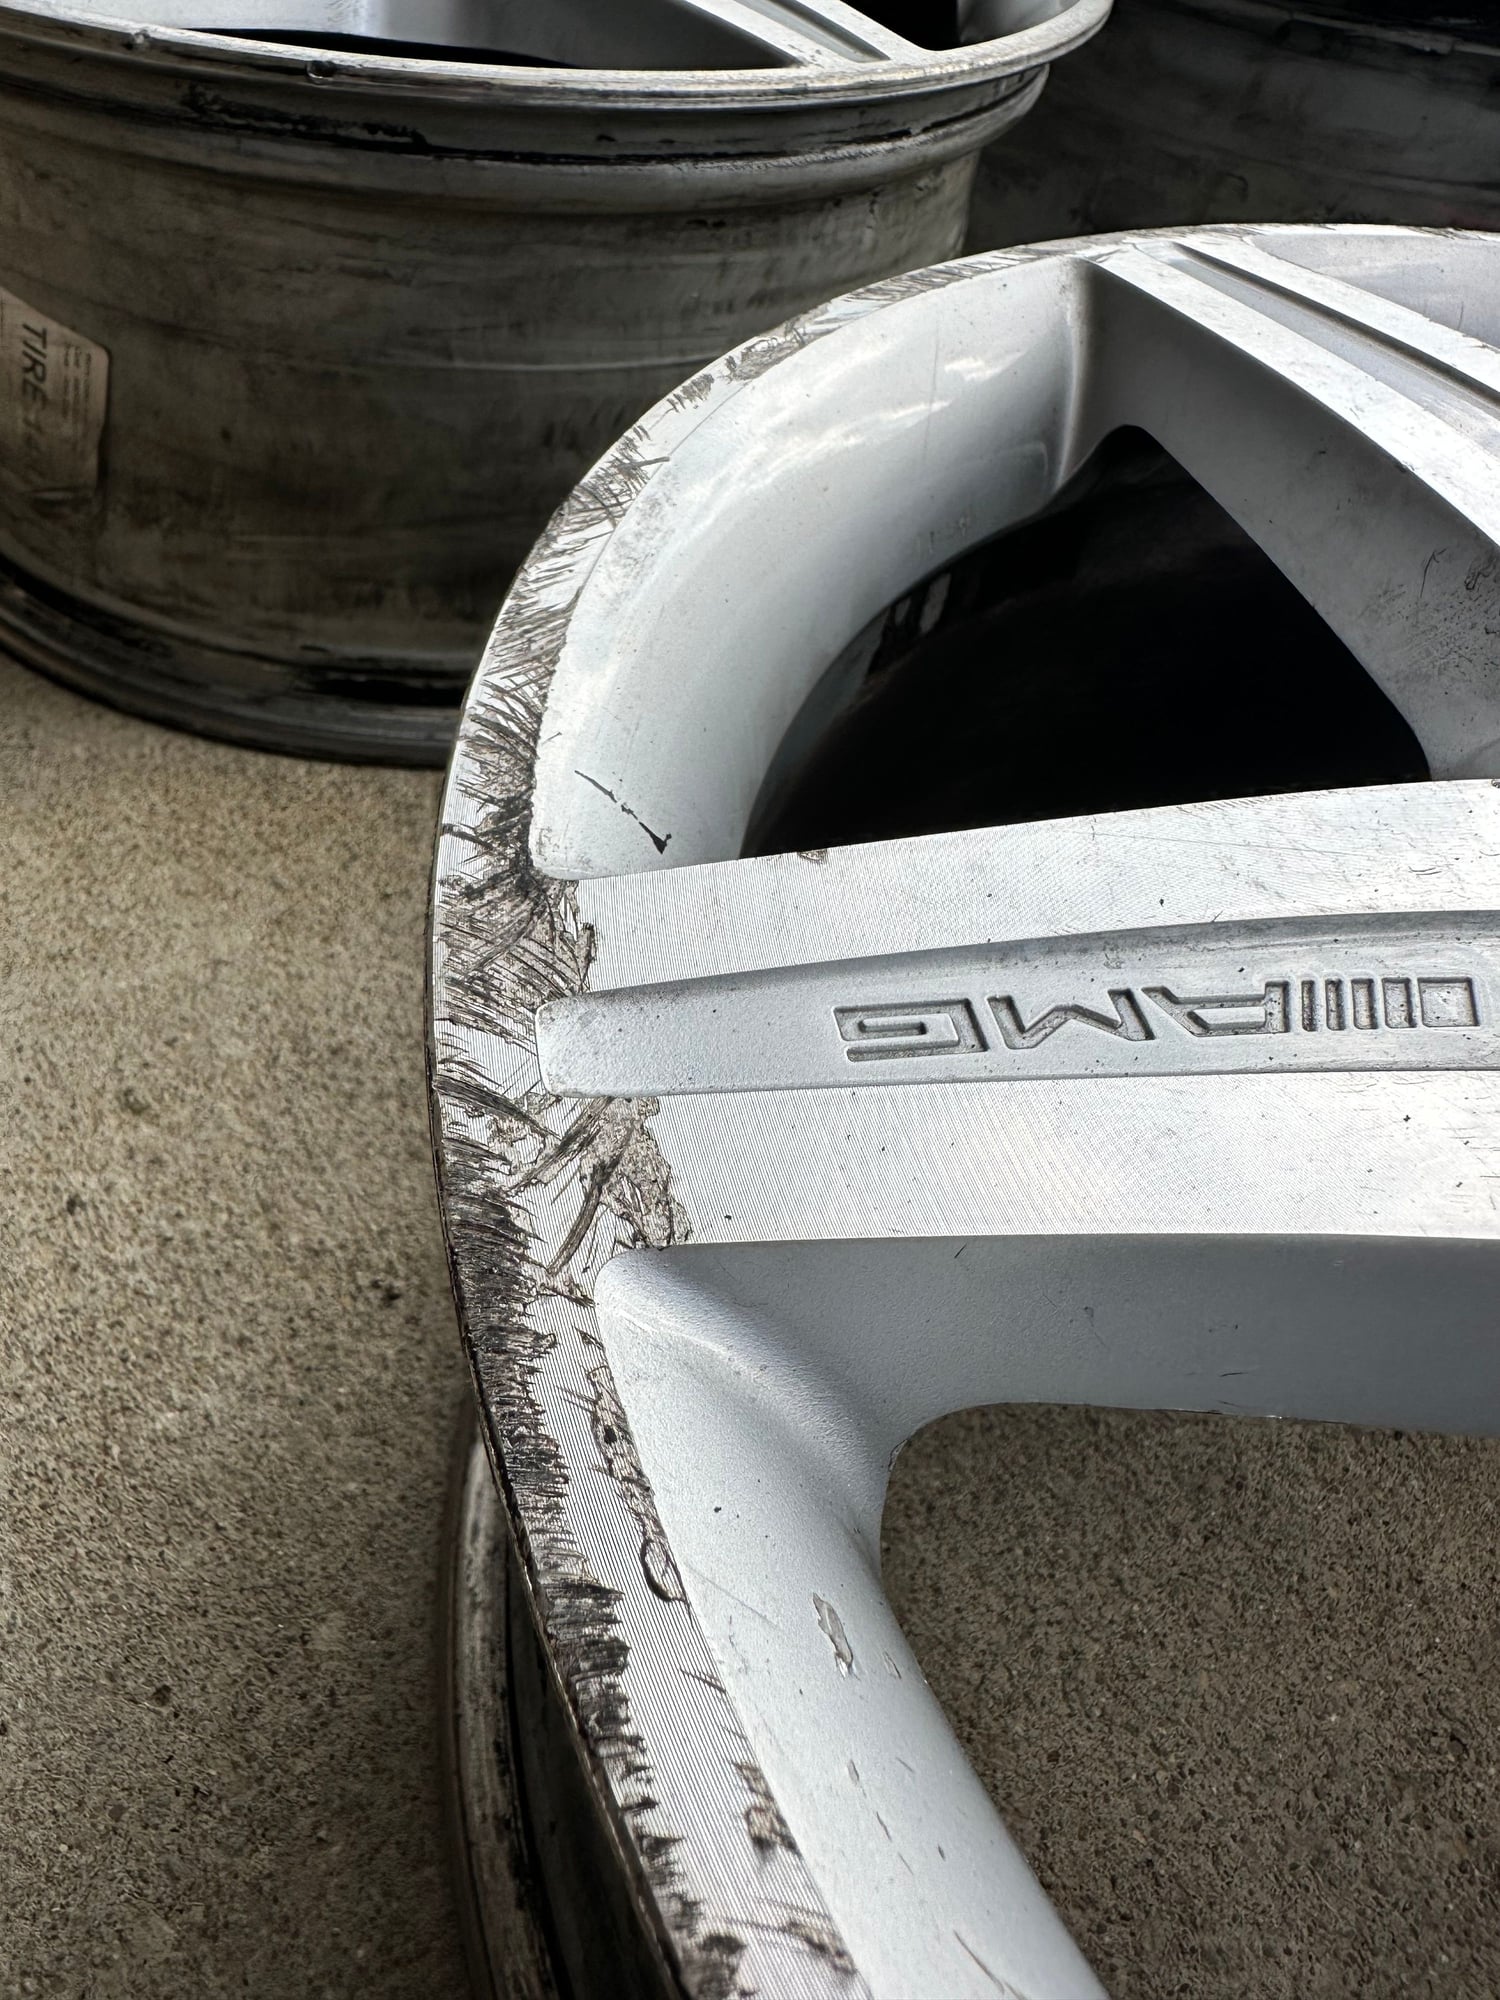 Wheels and Tires/Axles - S550/Cl550 OEM 19” AMG Wheels - Used - 2008 to 2012 Mercedes-Benz S550 - 2008 to 2012 Mercedes-Benz CL550 - Columbus, OH 43213, United States